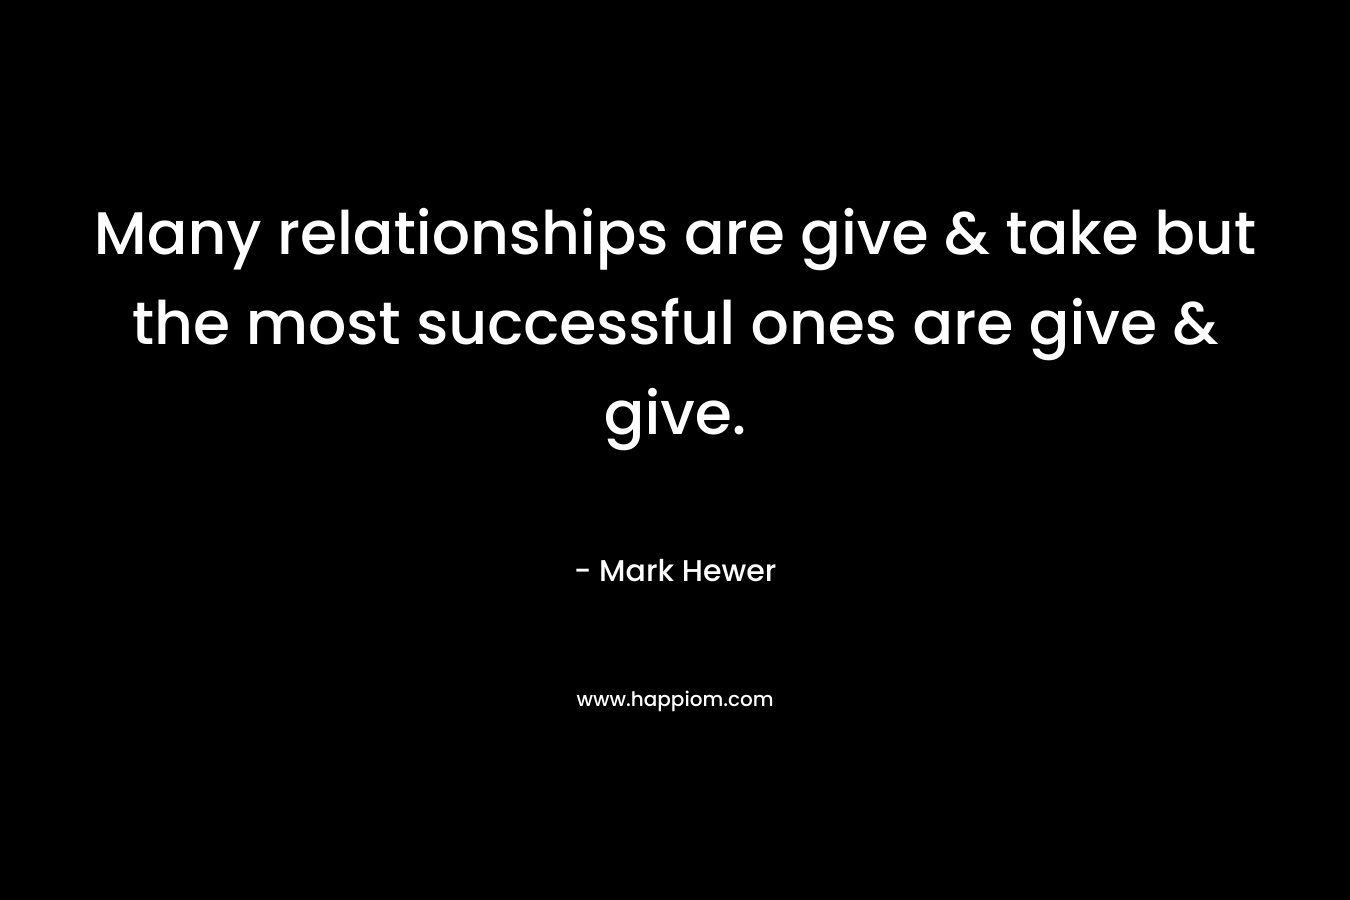 Many relationships are give & take but the most successful ones are give & give.